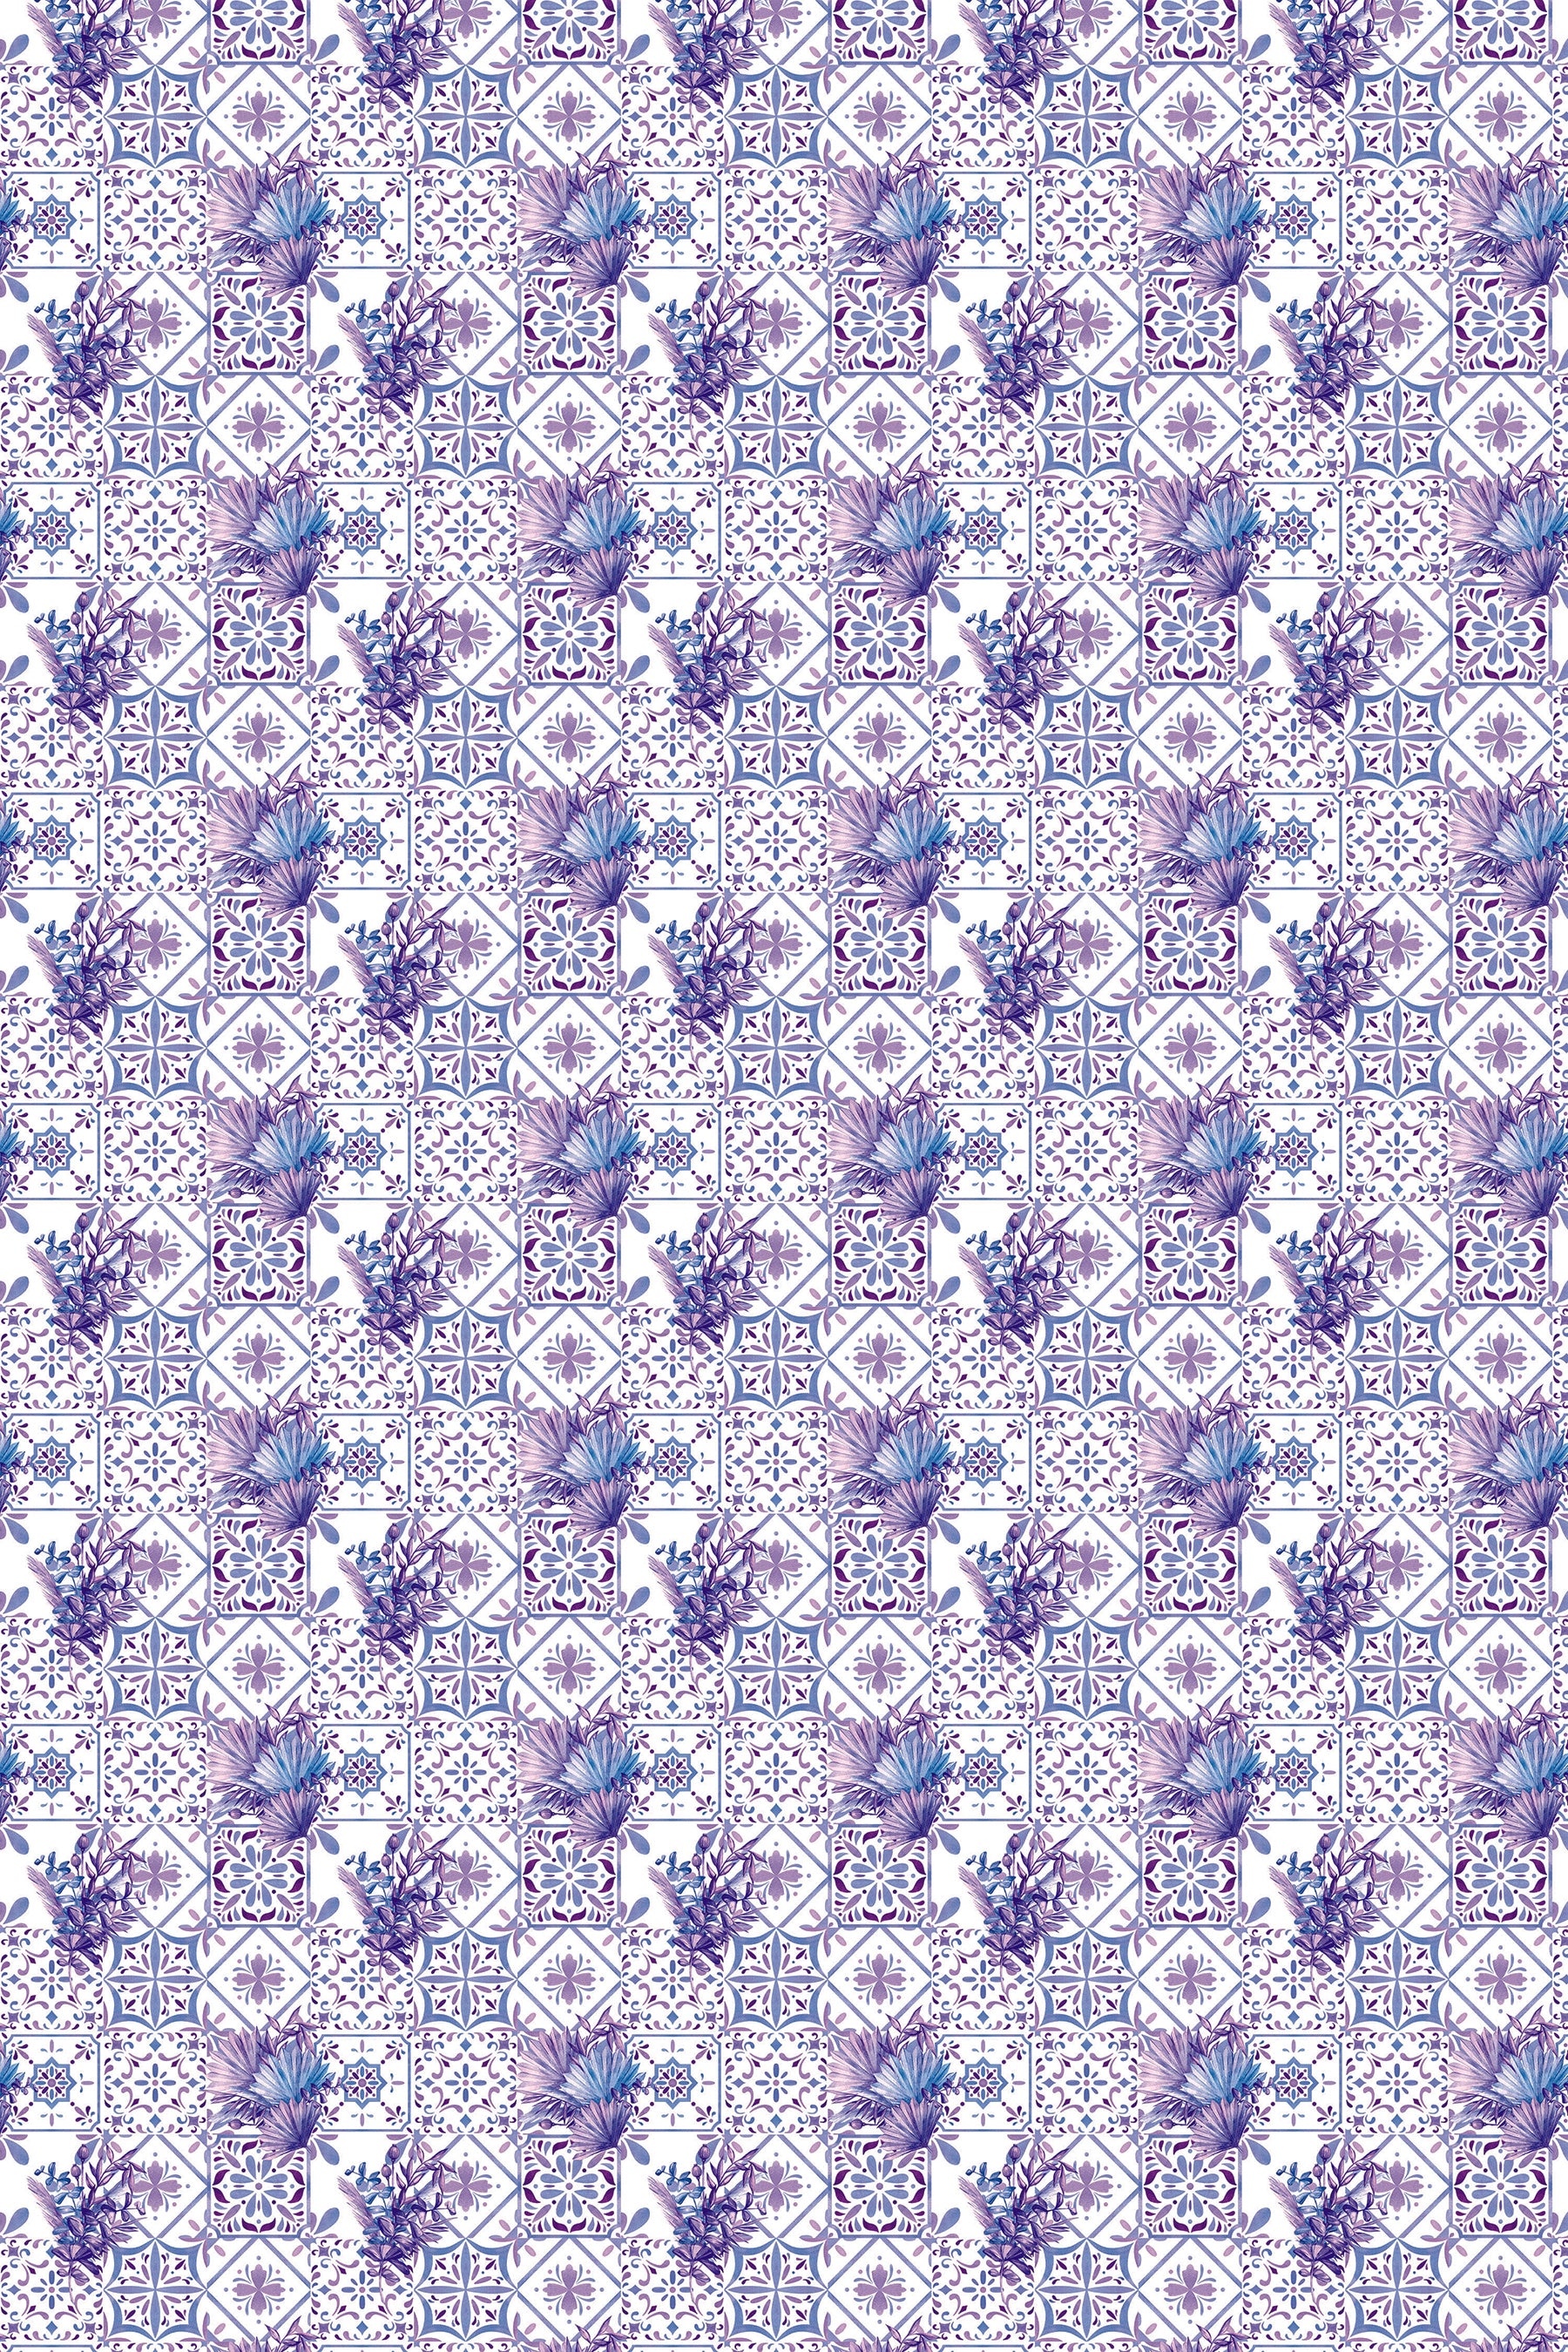 Floral Print White and Purple Table Cover